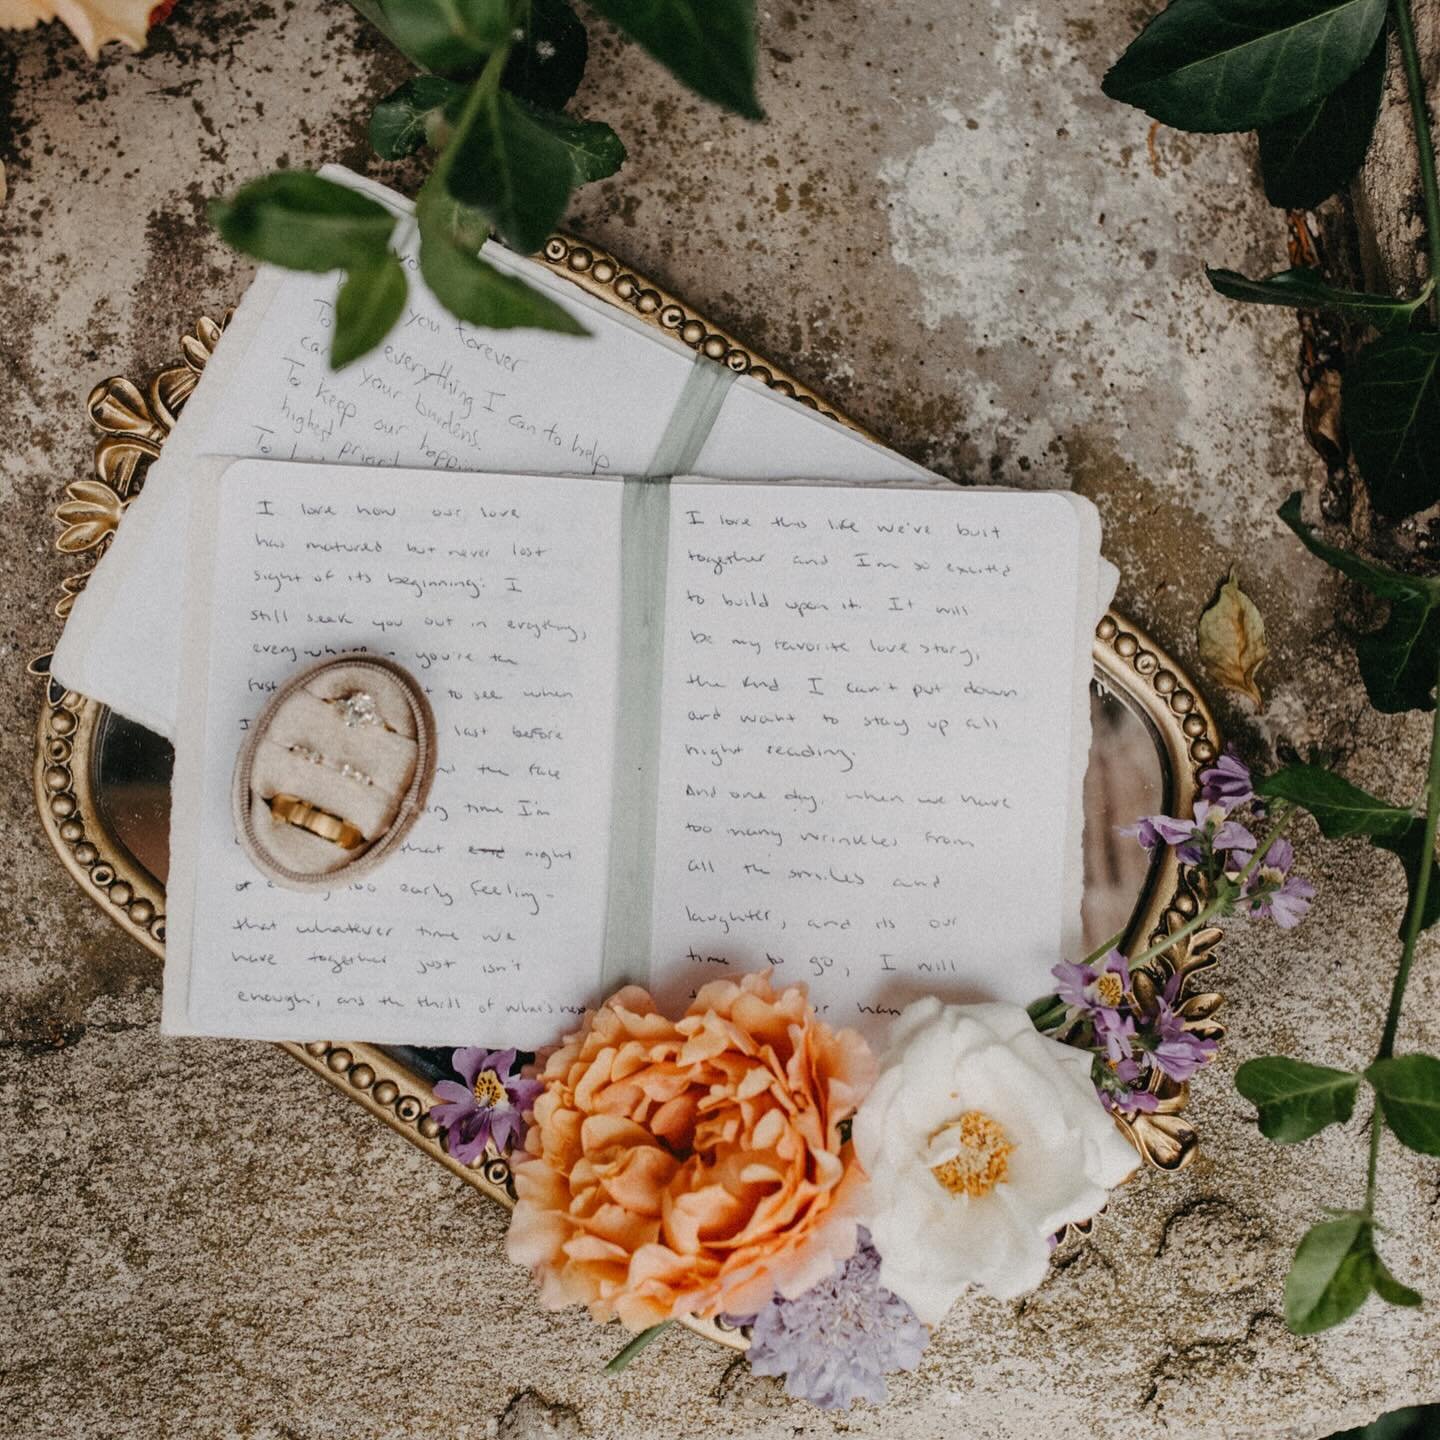 You know me. I&rsquo;m a sucker for details!
.
.
Bride: @bmcward
Planner: @designs.by.daisy
Florals: @wearewildflowers
Catering: @queenofheartscatering 
Dress: @vanclevebridal
Hair/Makeup: @Somethingyoubeauty 
Cake: @themastersbaker
2nd shooter: @ela